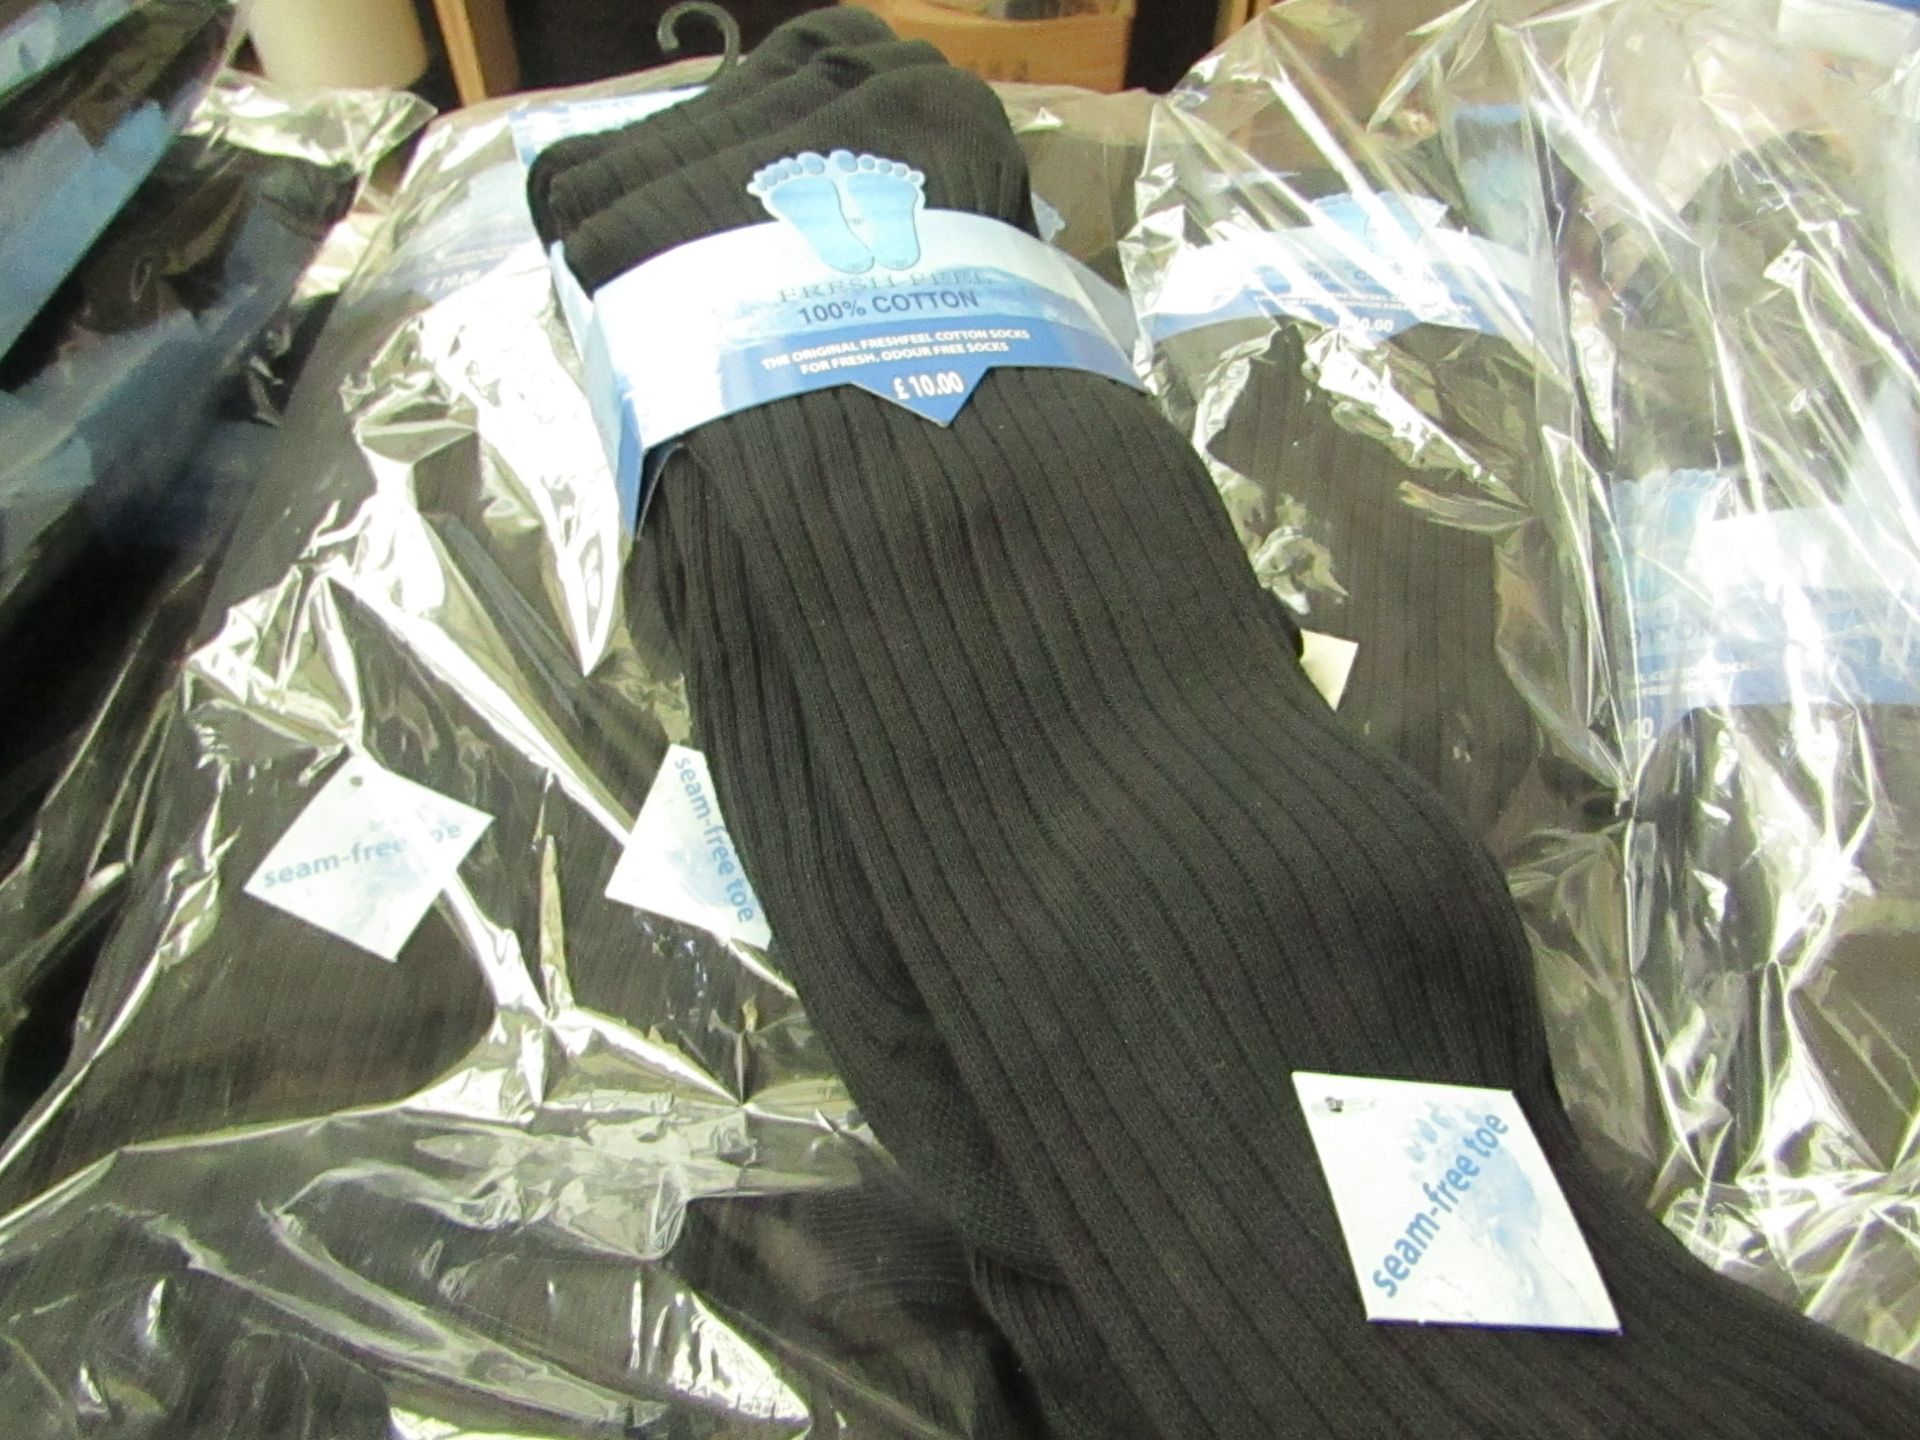 12 x pairs of 100% Cotton Rich Seam Free Socks size 6/11 new & packaged